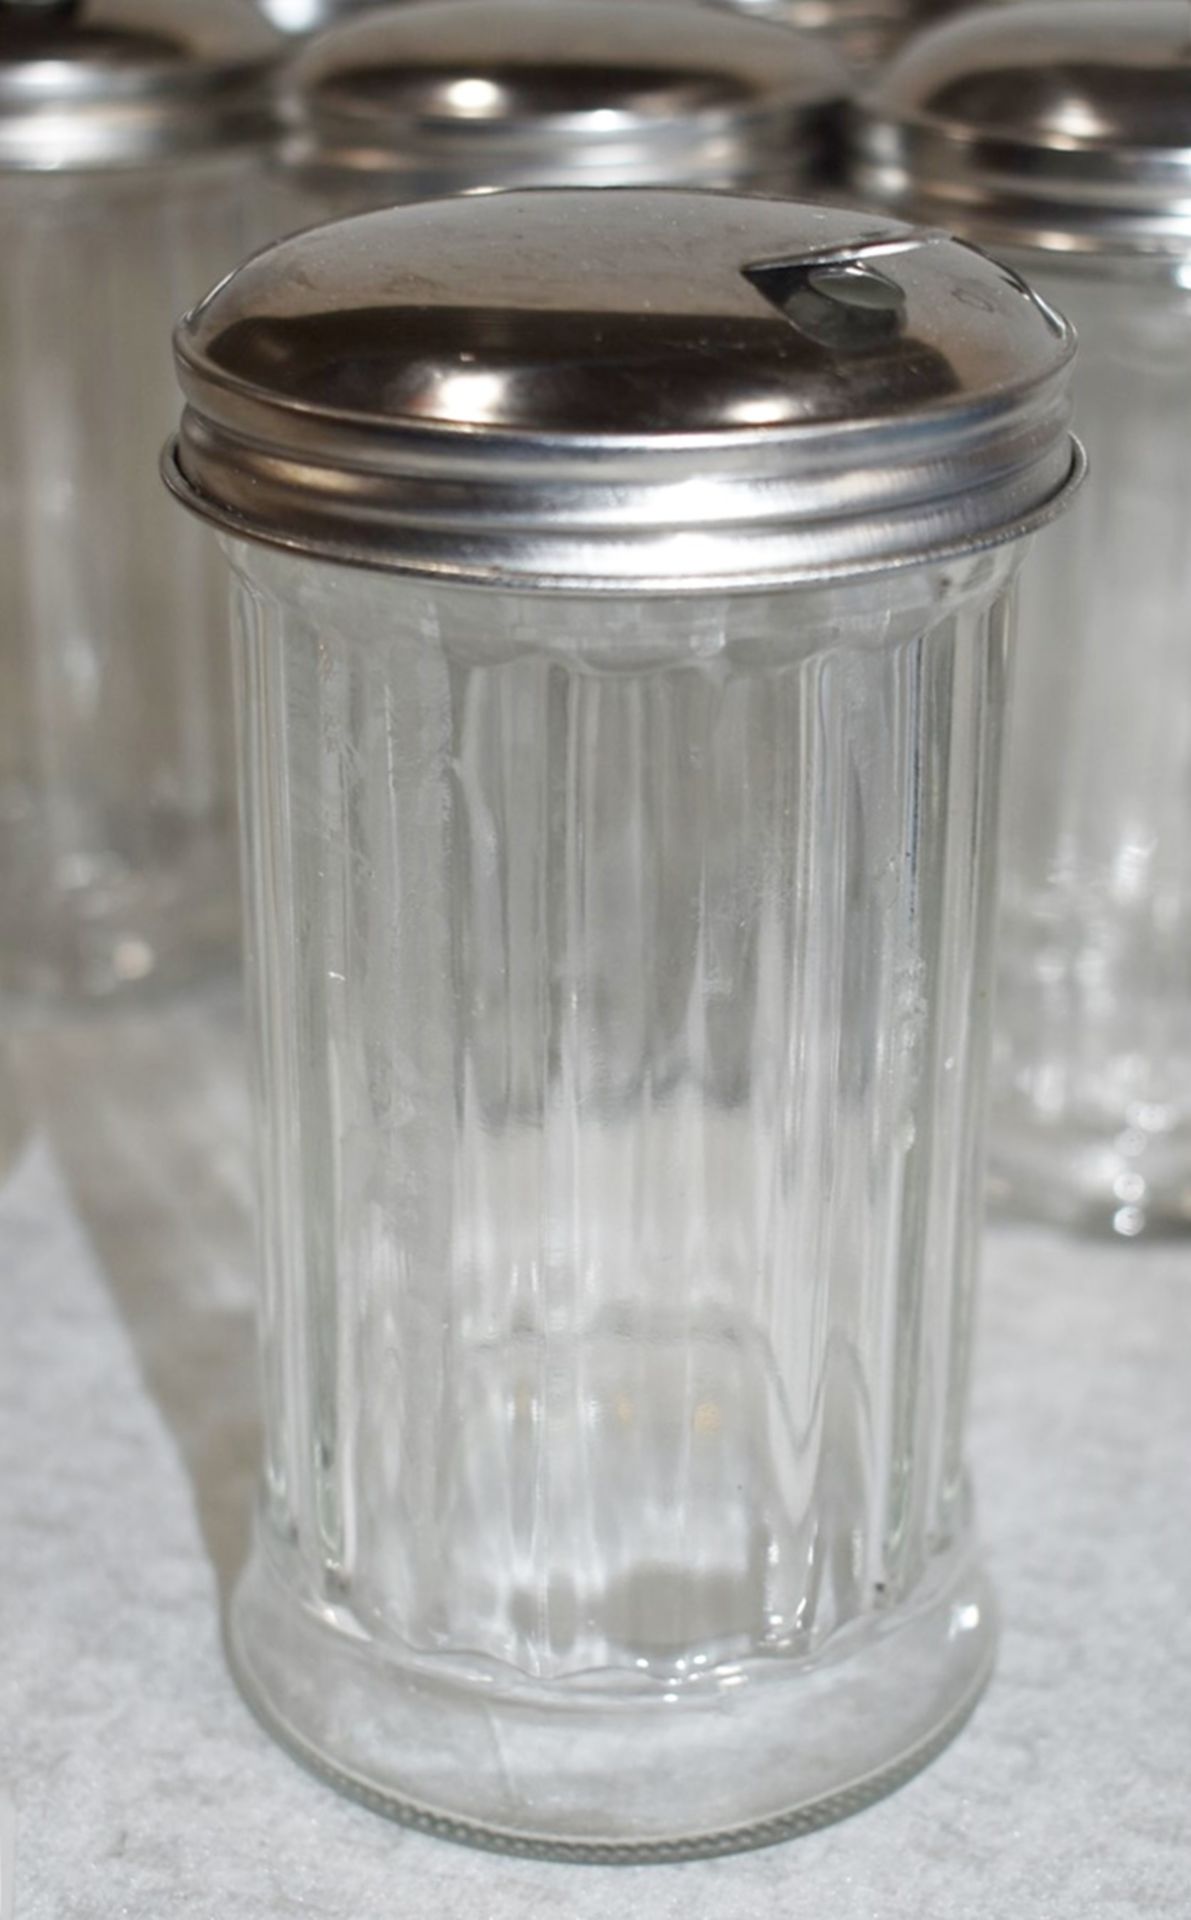 14 x Glass Sugar Dispensing Pots With Stainless Steel Lids - Suitable For Cafes or Restaurants - Image 8 of 8